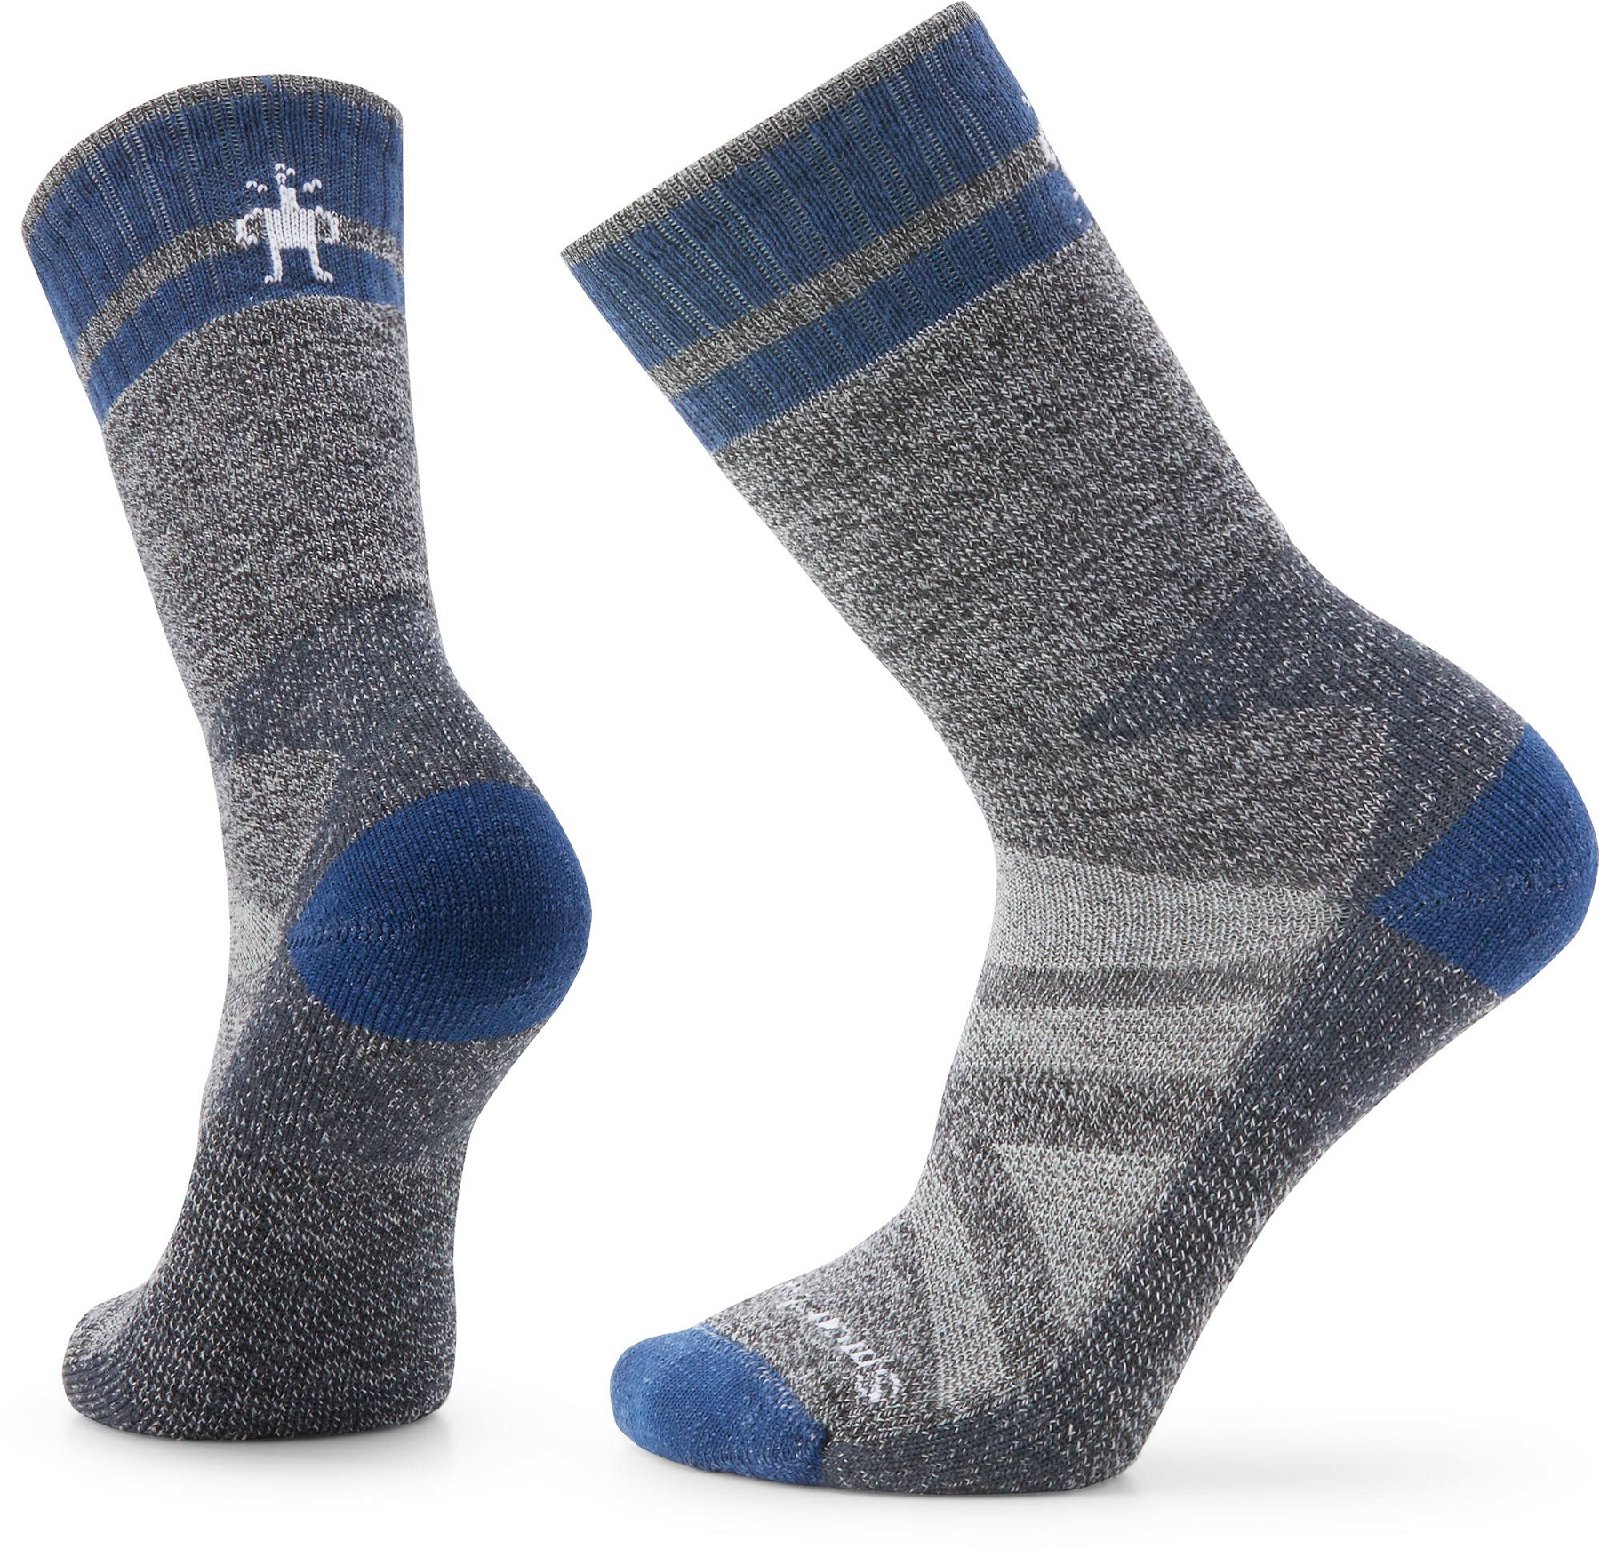 Smartwool Mountaineer Max Tall Crew M's